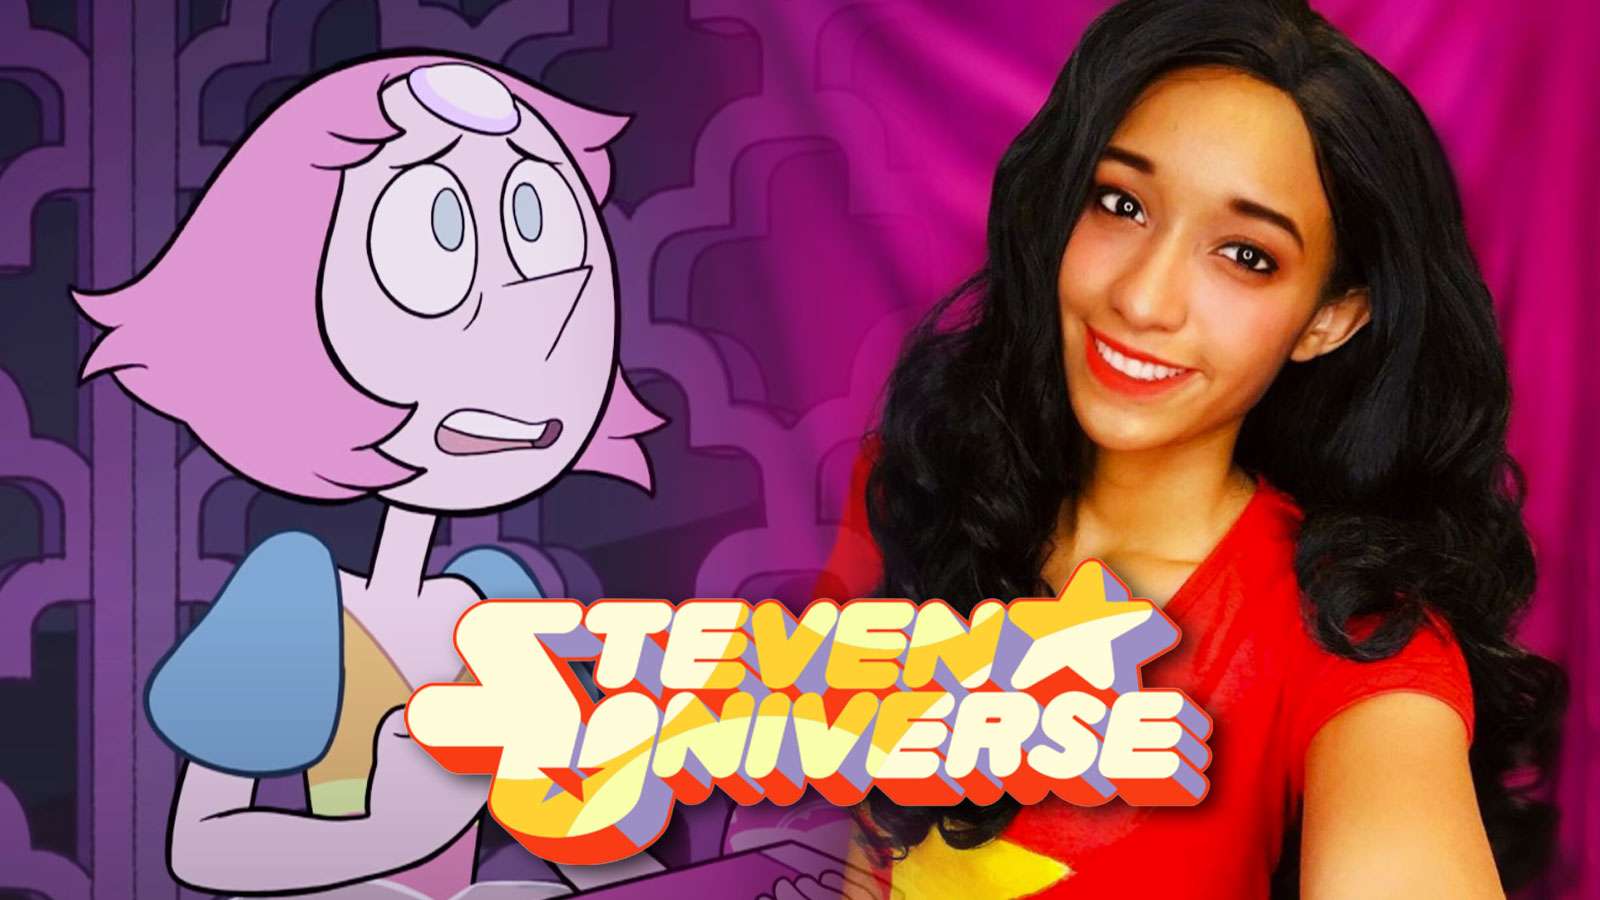 pearl steven universe cosplay